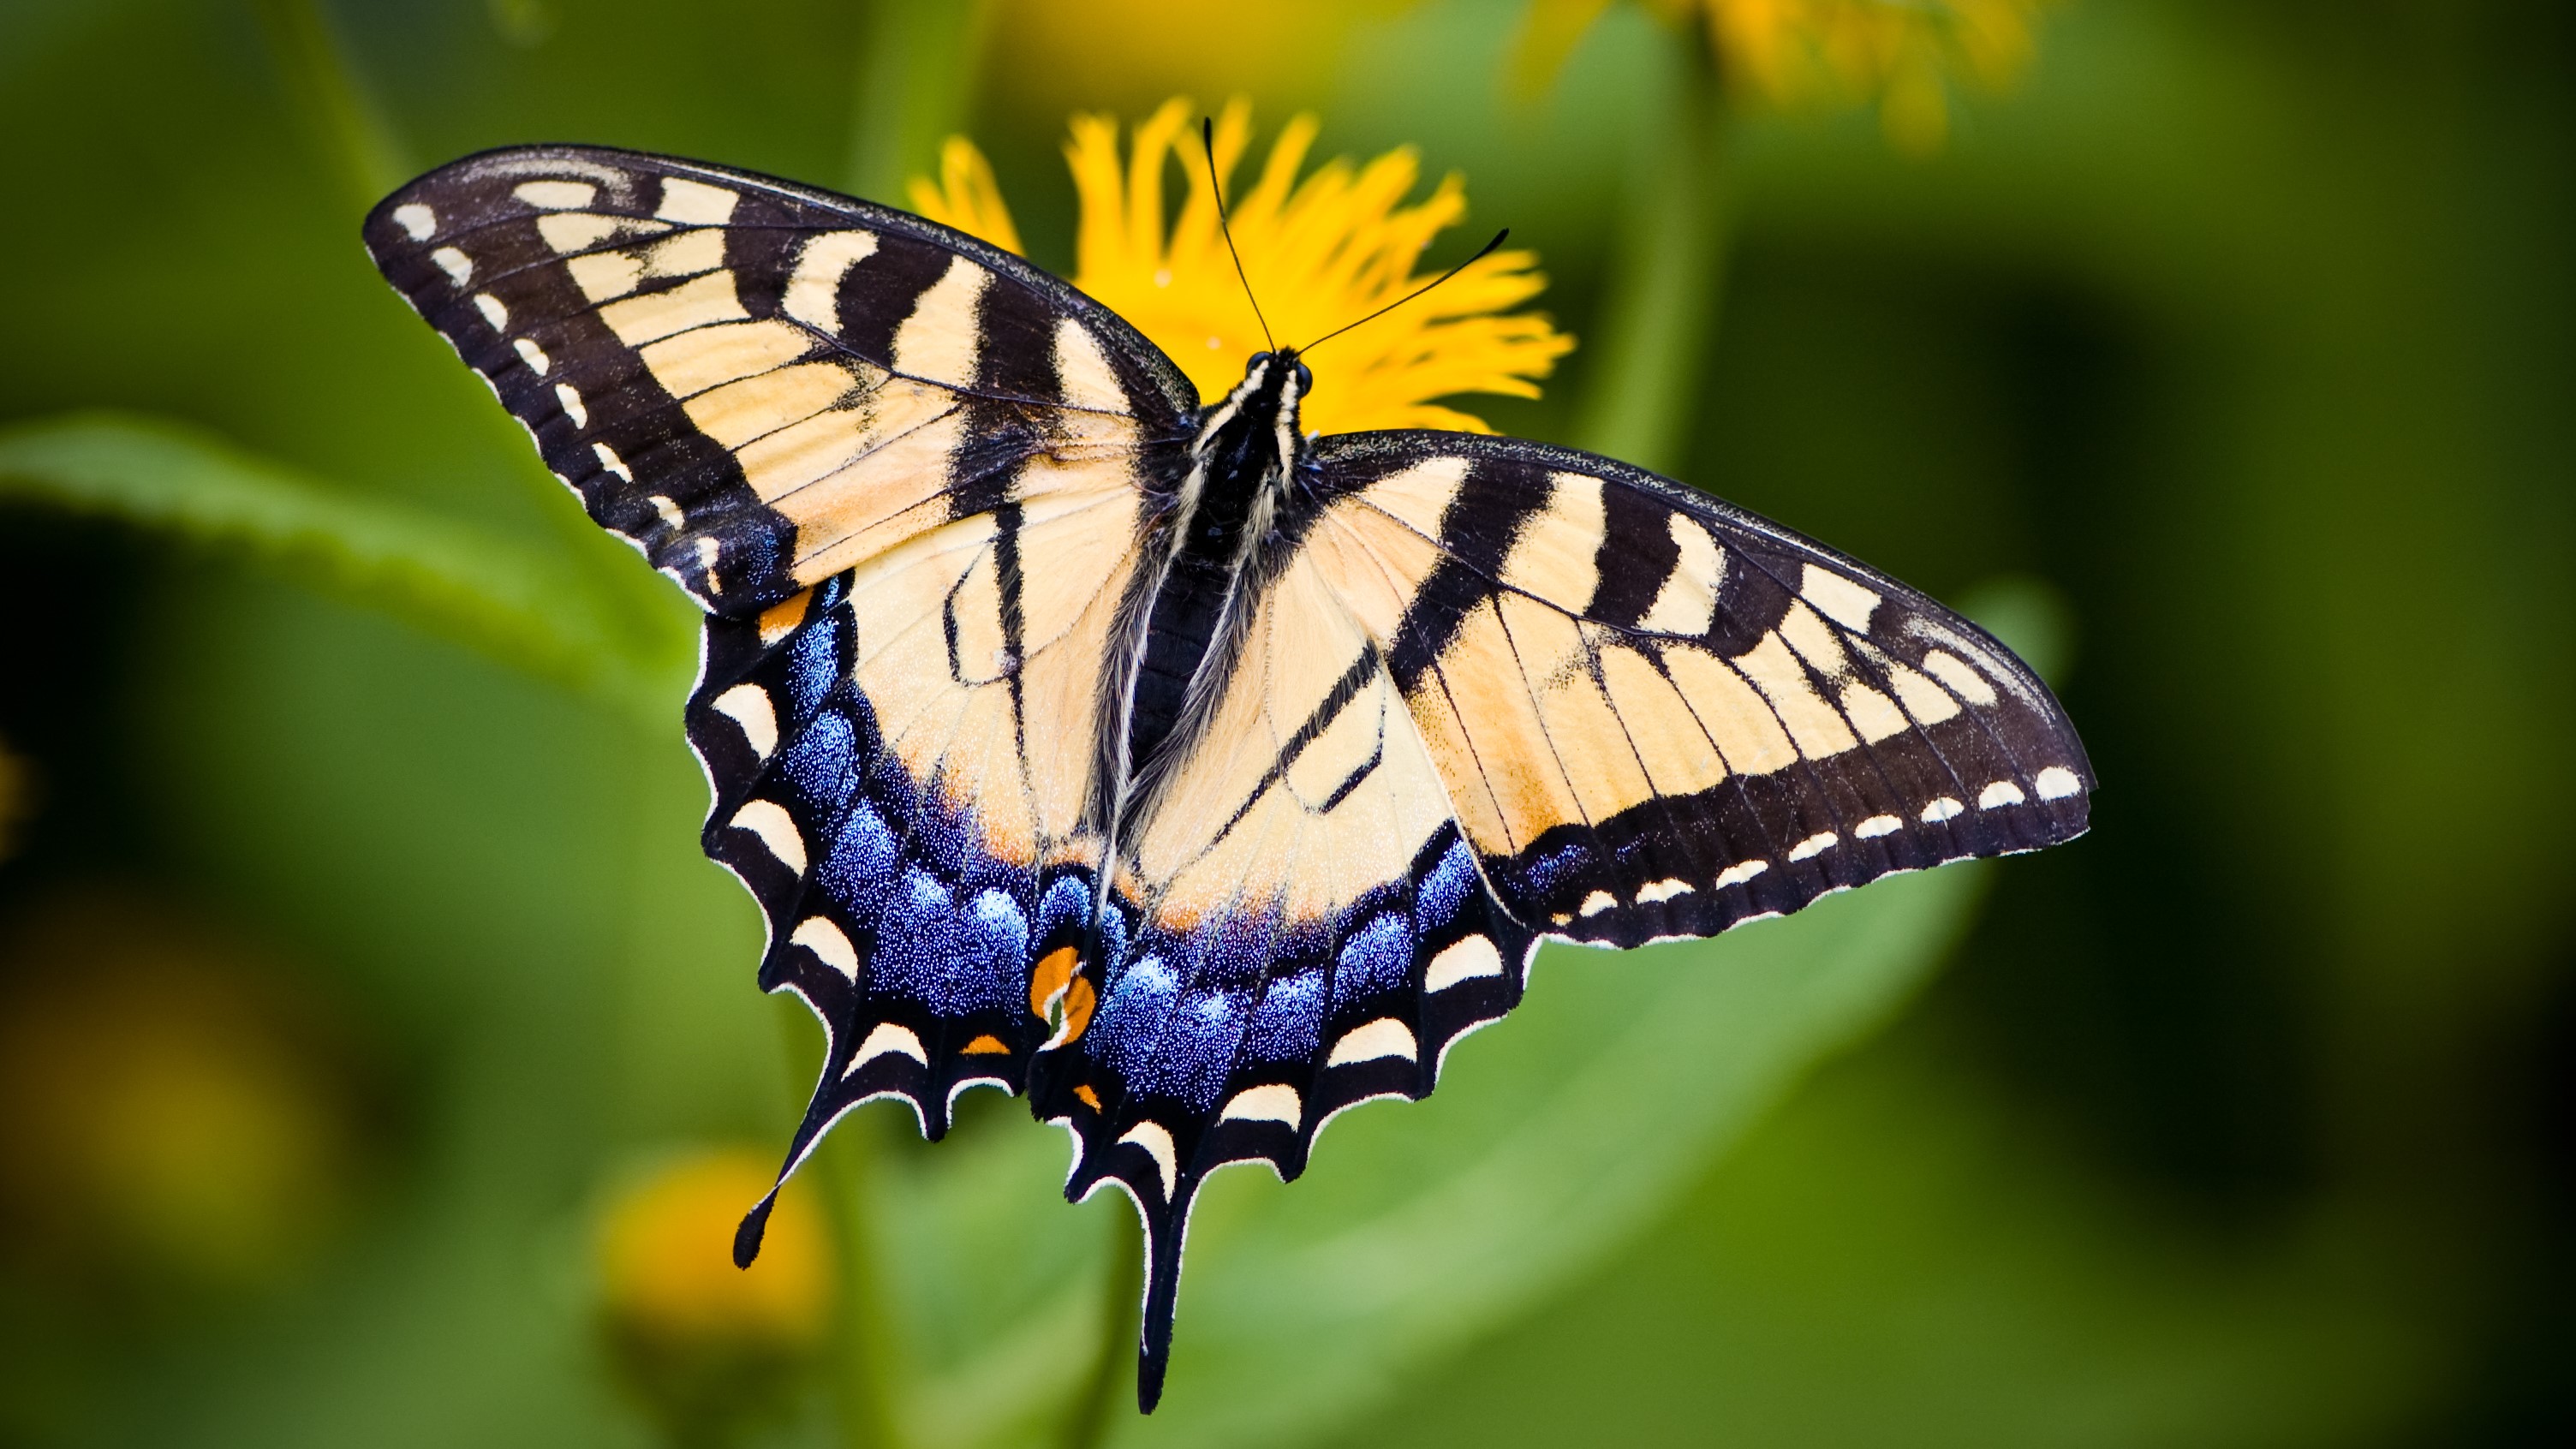 Tiger Swallowtail Butterfly (Papilio glaucus )